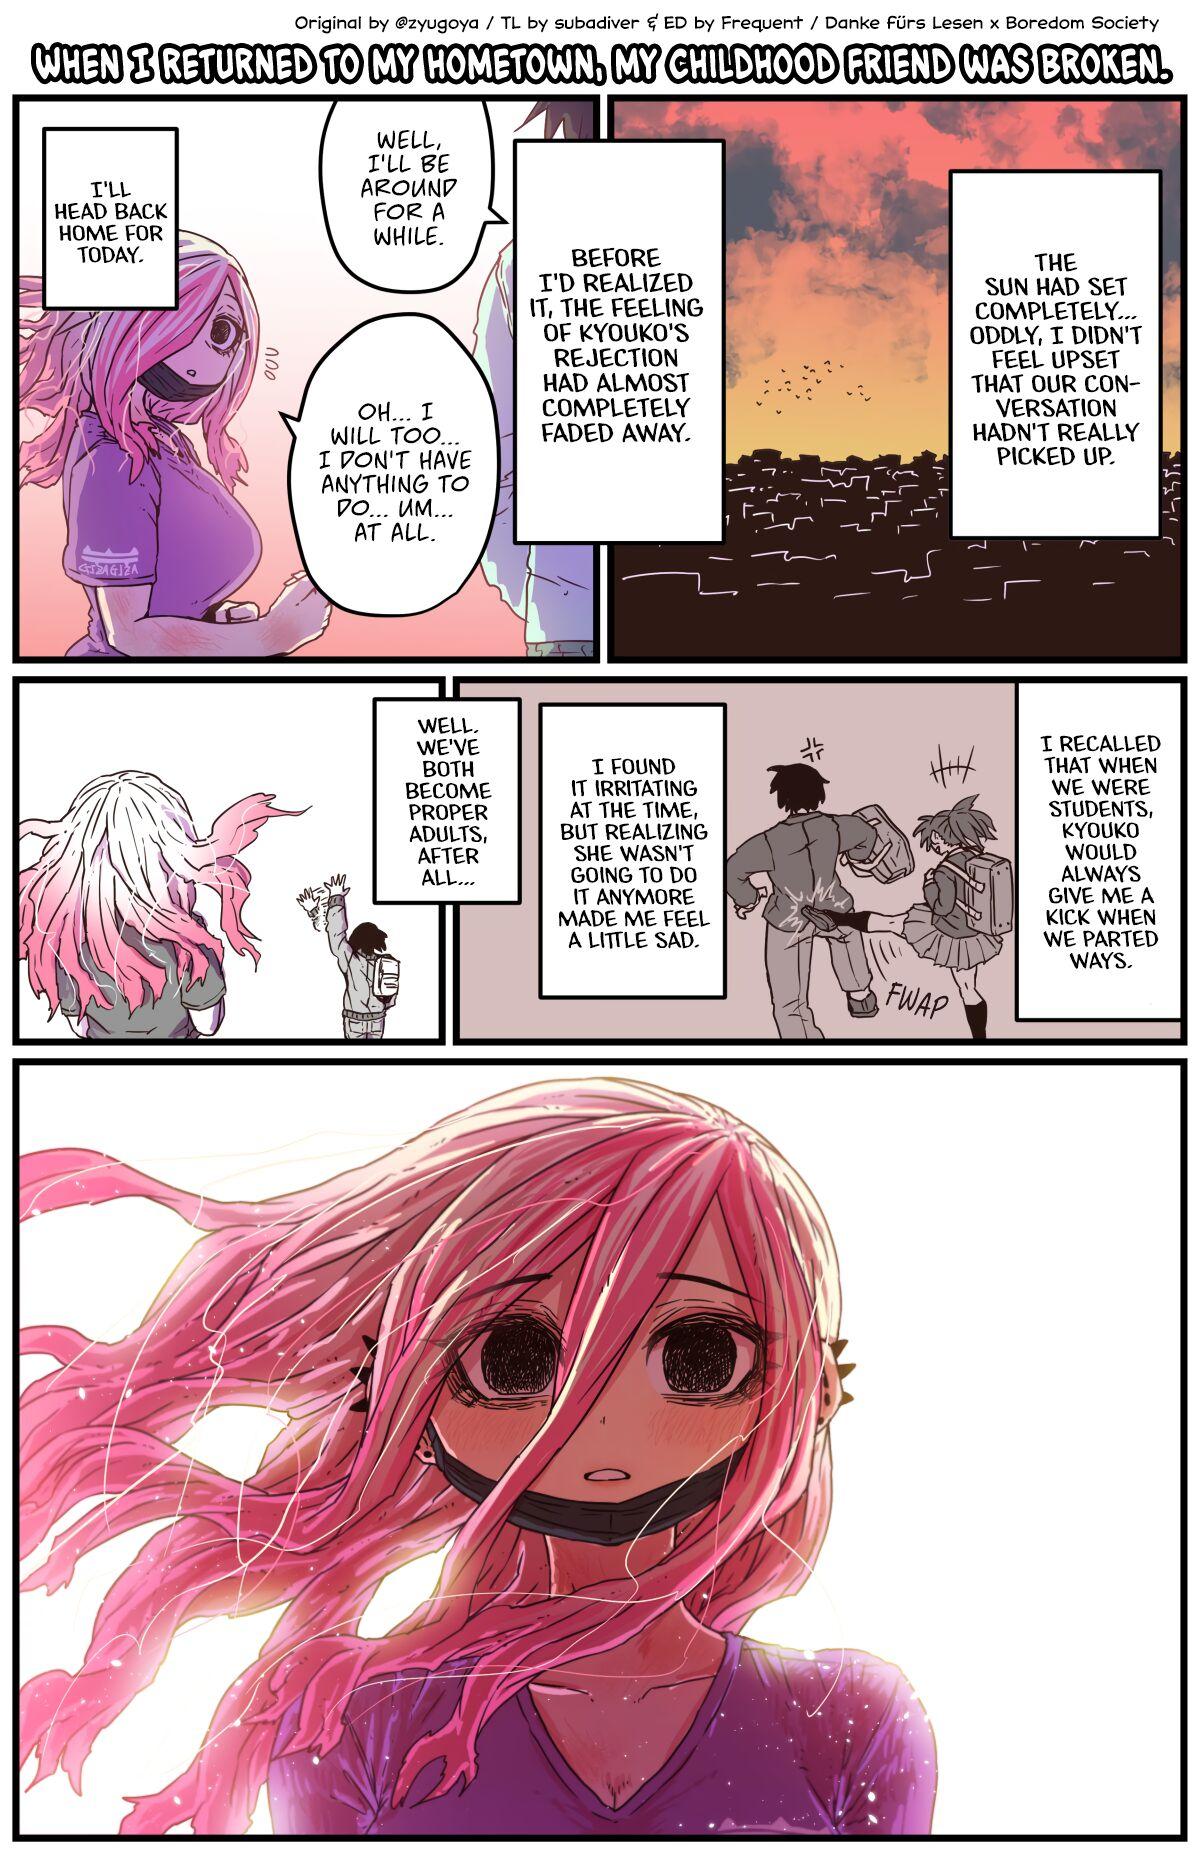 Mmf When I Returned to My Hometown, My Childhood Friend was Broken - Original Amatoriale - Page 5